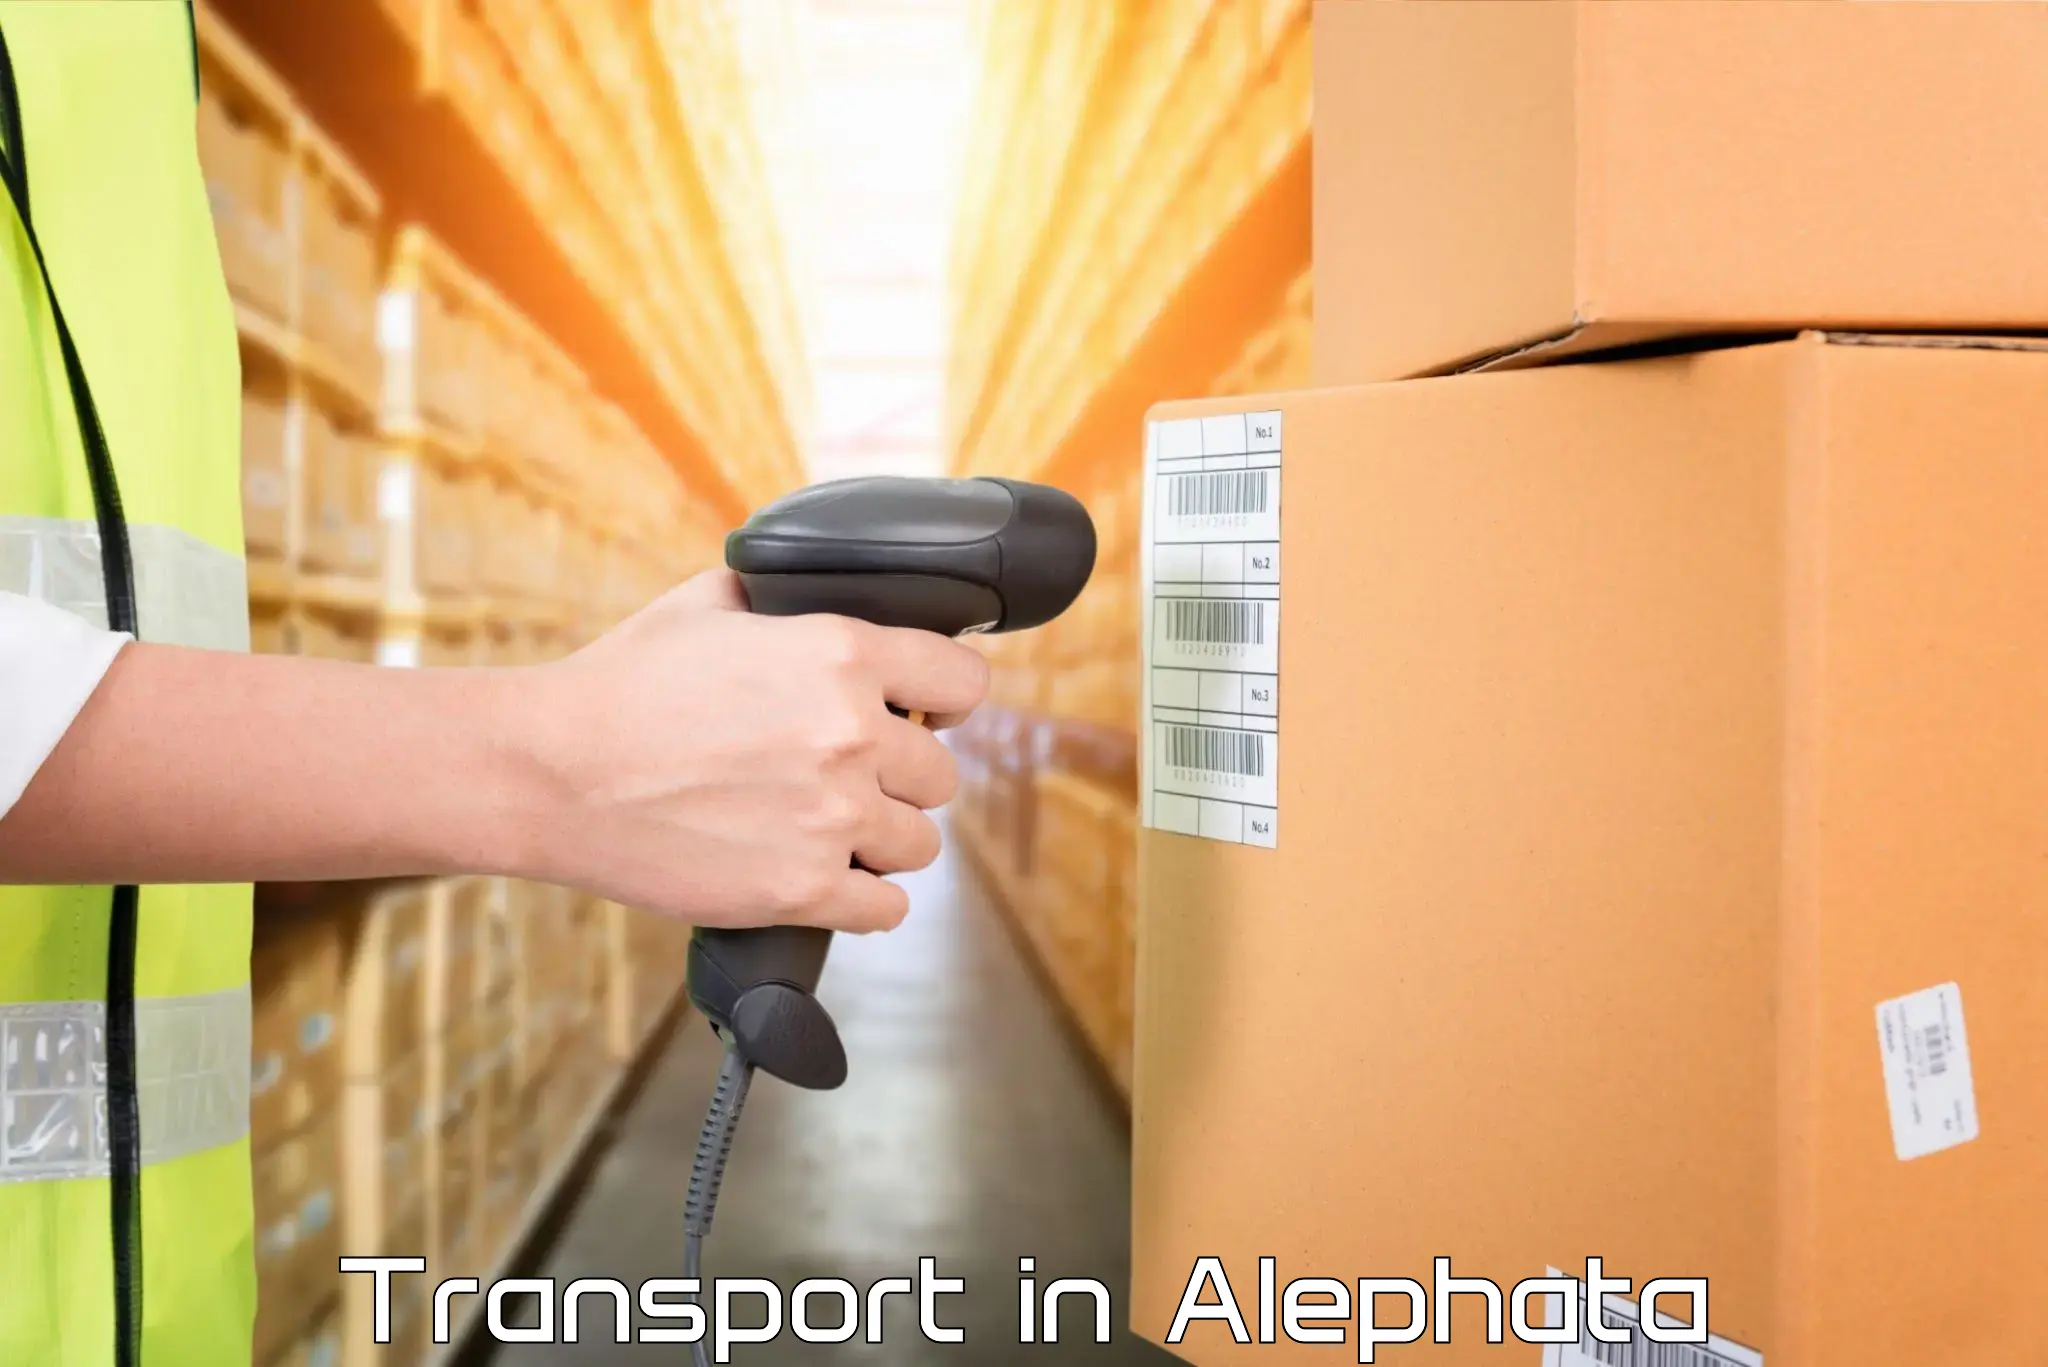 Transport shared services in Alephata